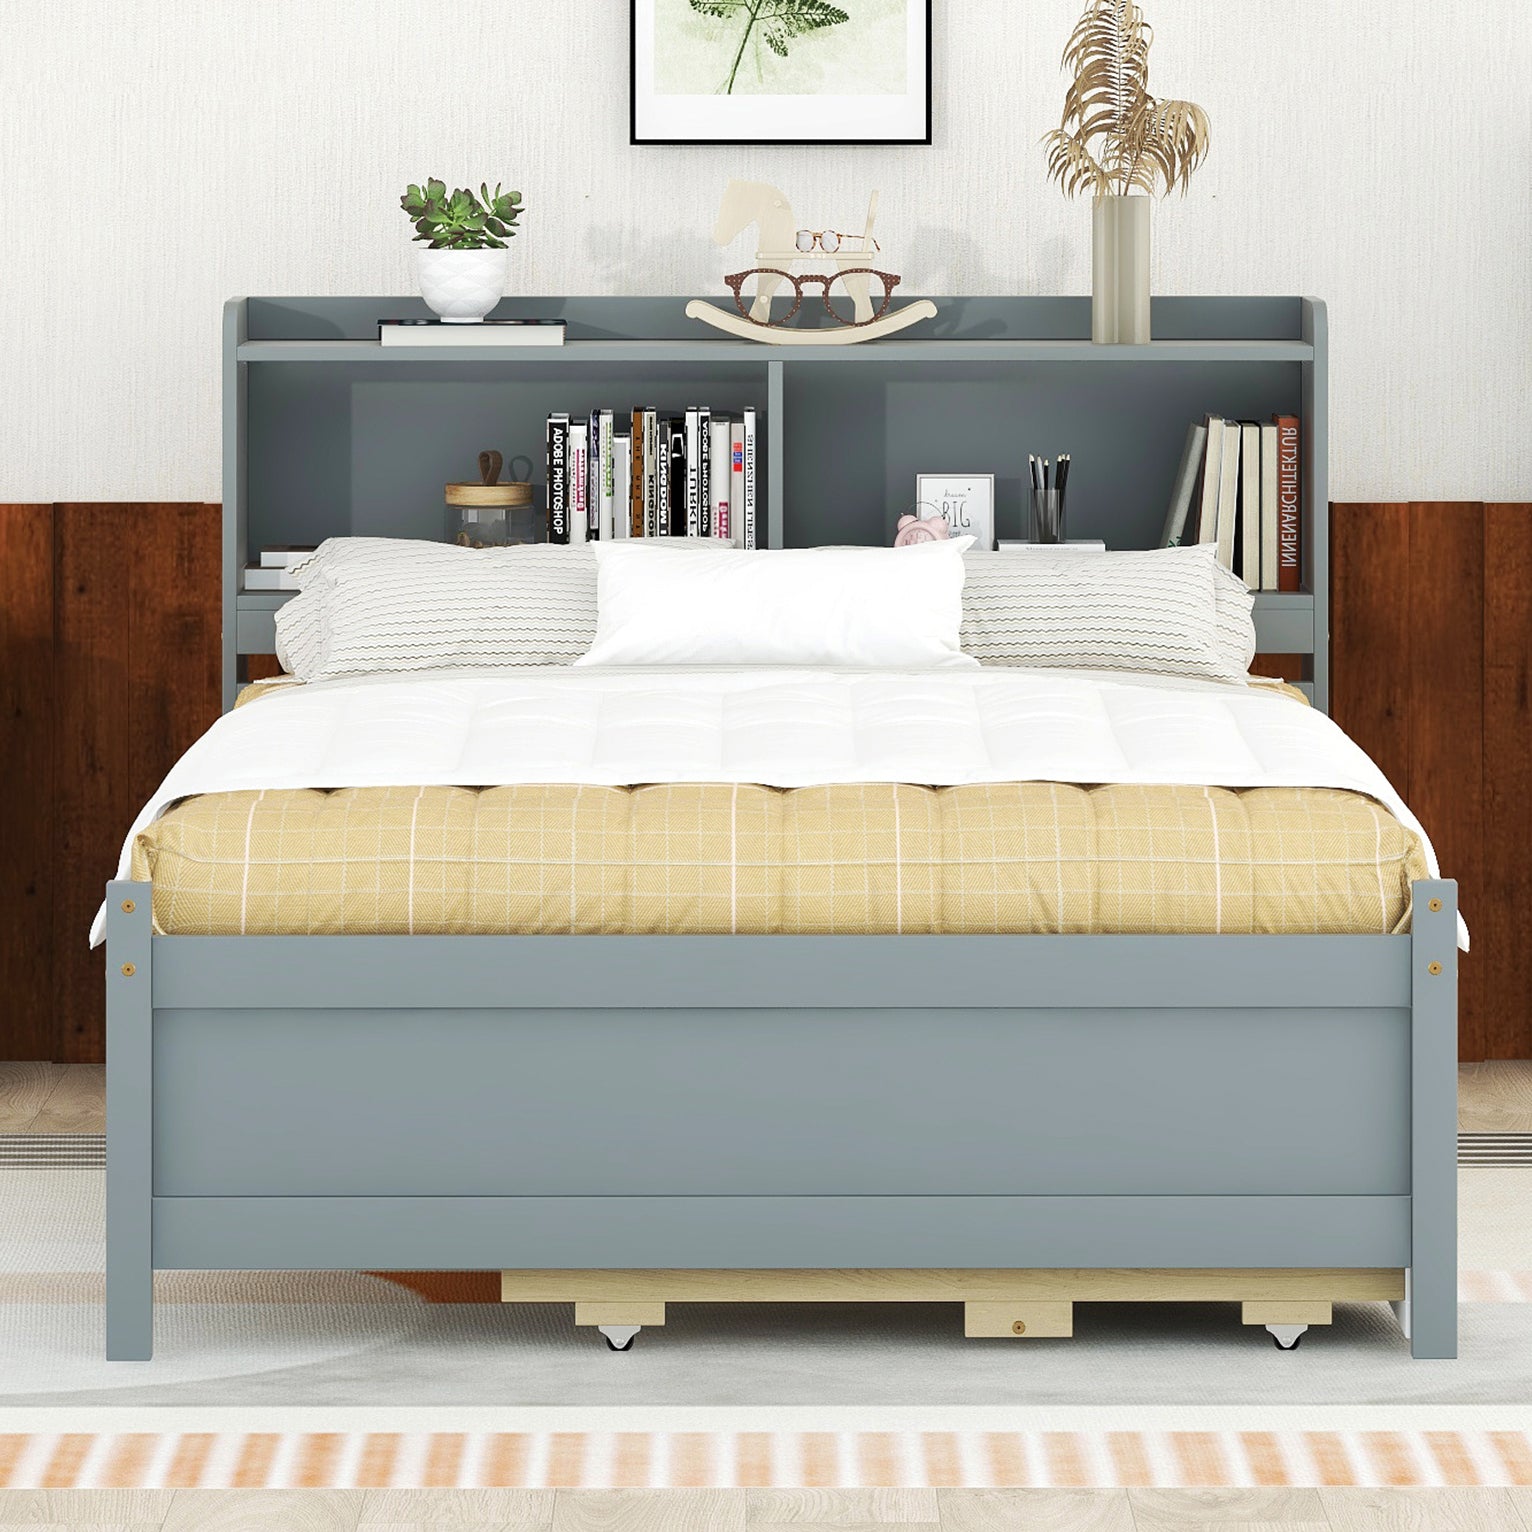 Bellemave Full Size PlatformBed with Bookcase Headboard, Trundle and Storage Drawers